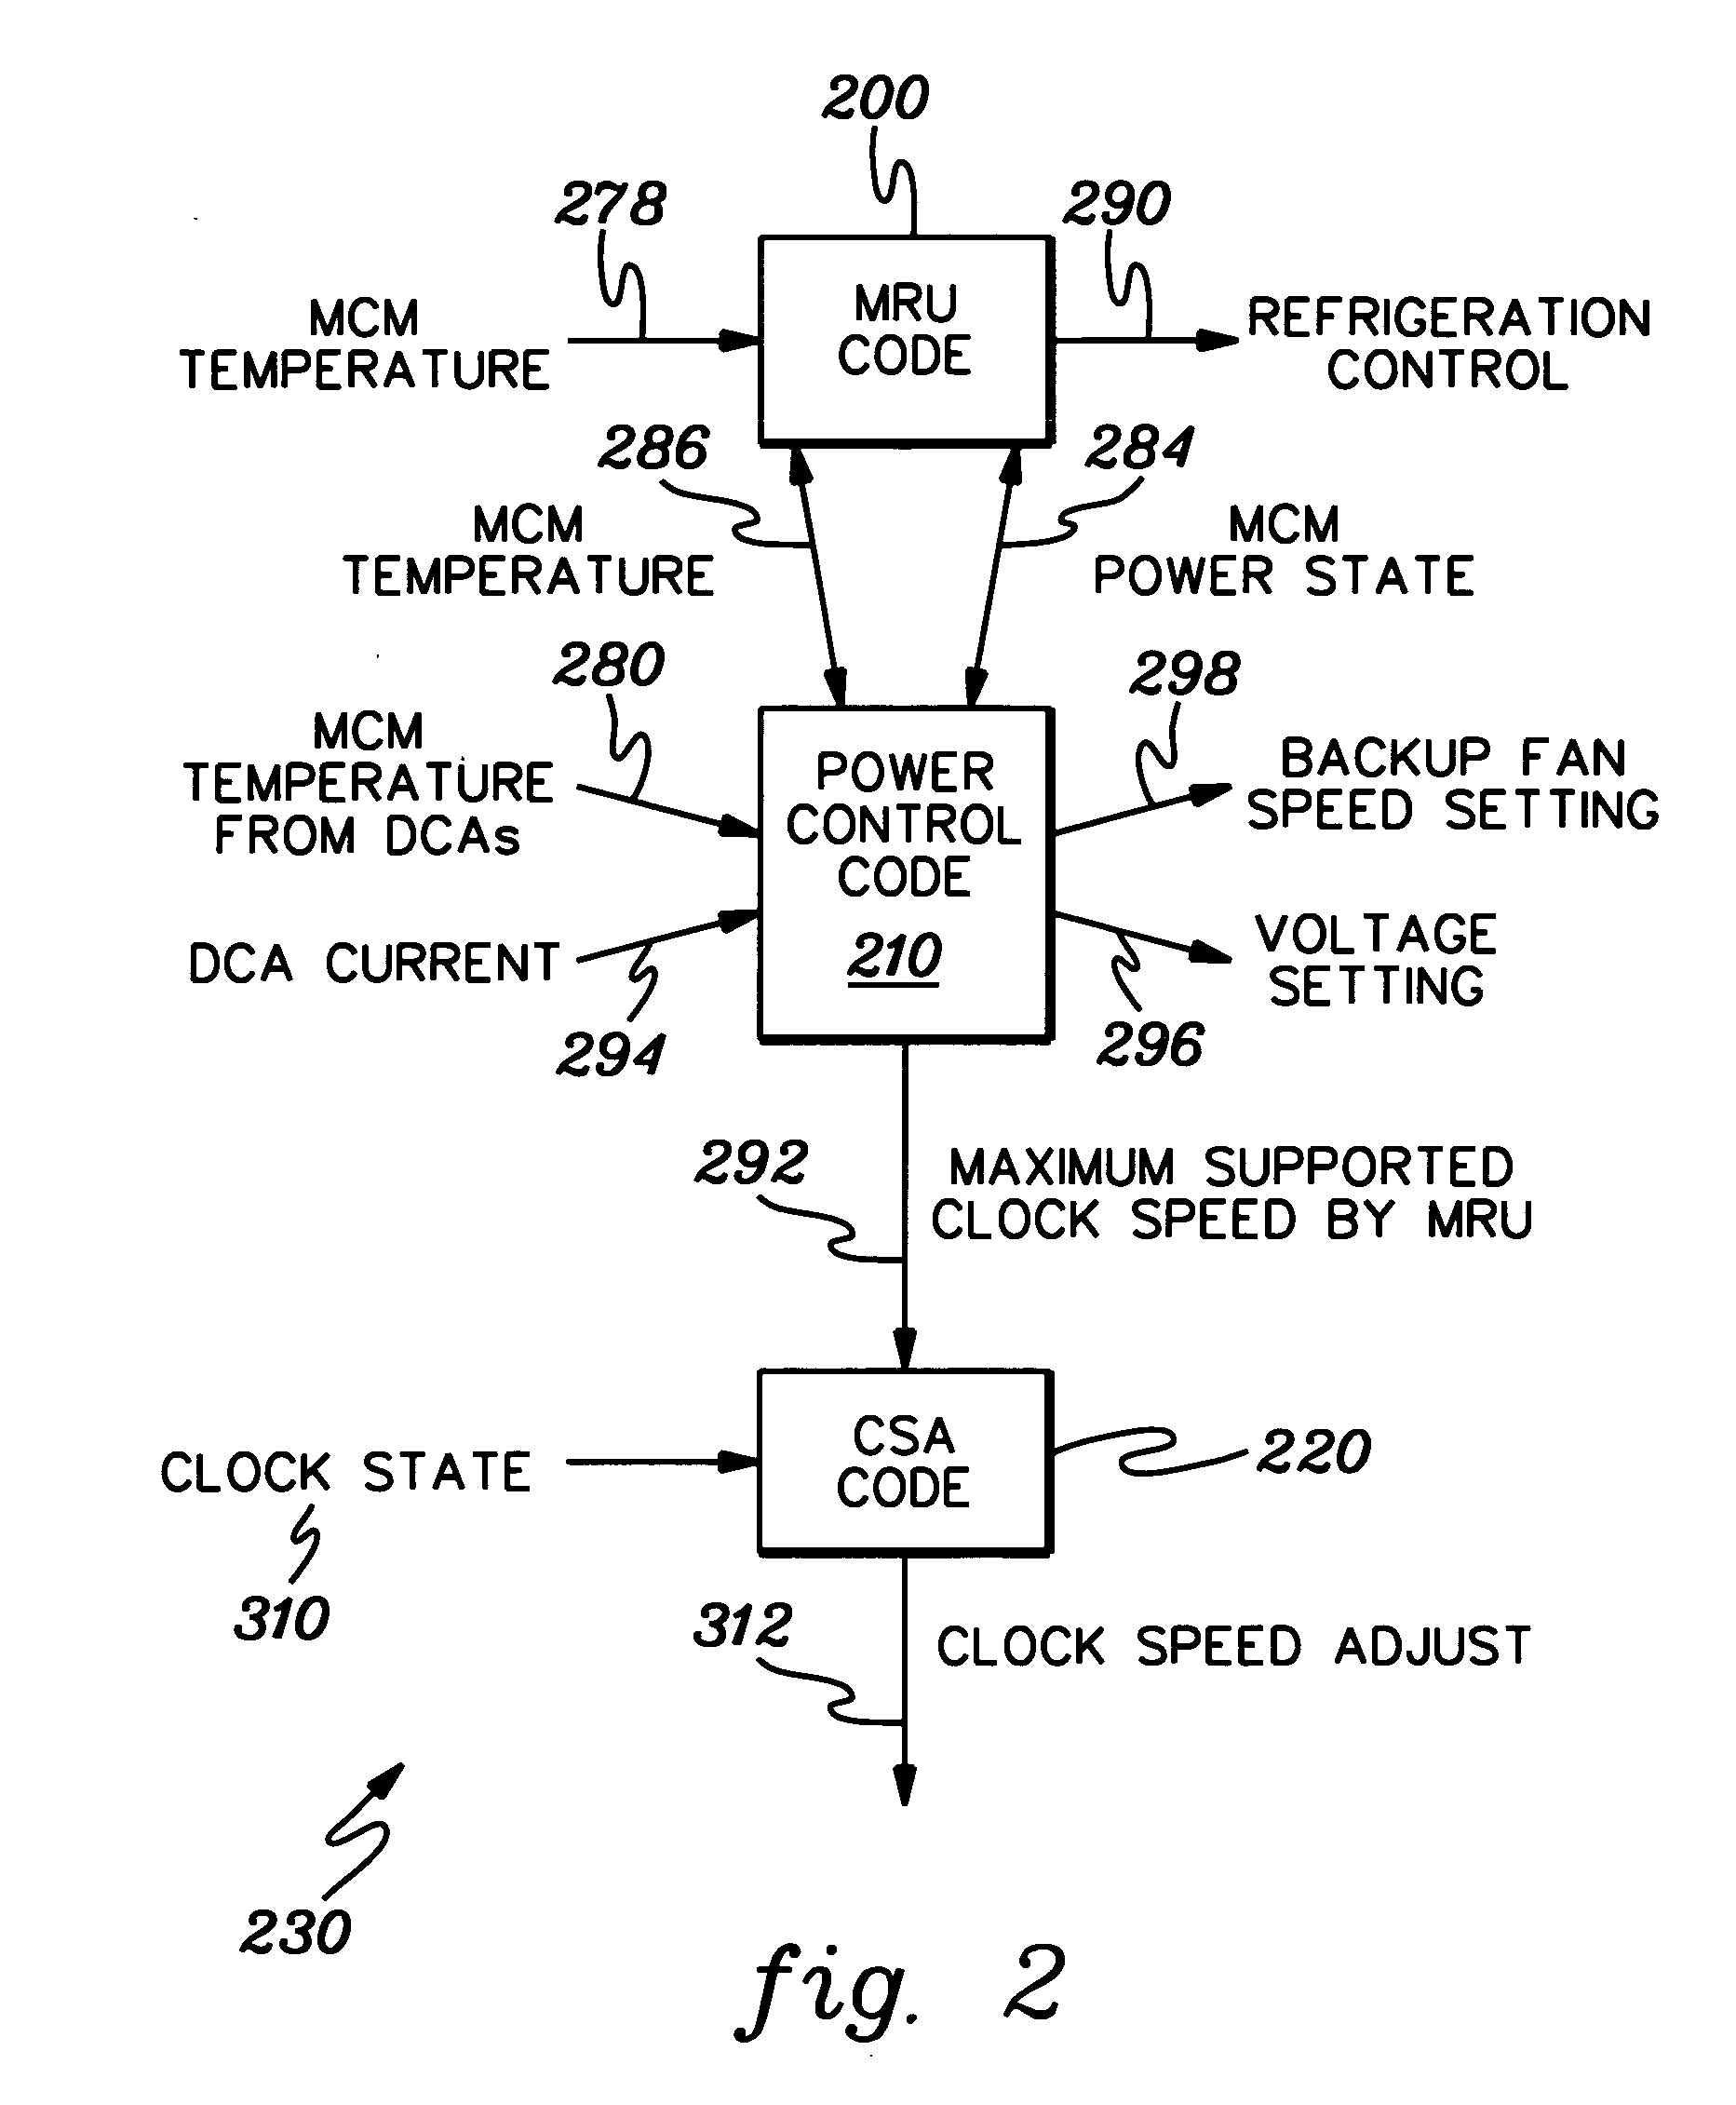 Systems and methods for cooling electronics components employing vapor compression refrigeration with selected portions of expansion structures coated with polytetrafluorethylene